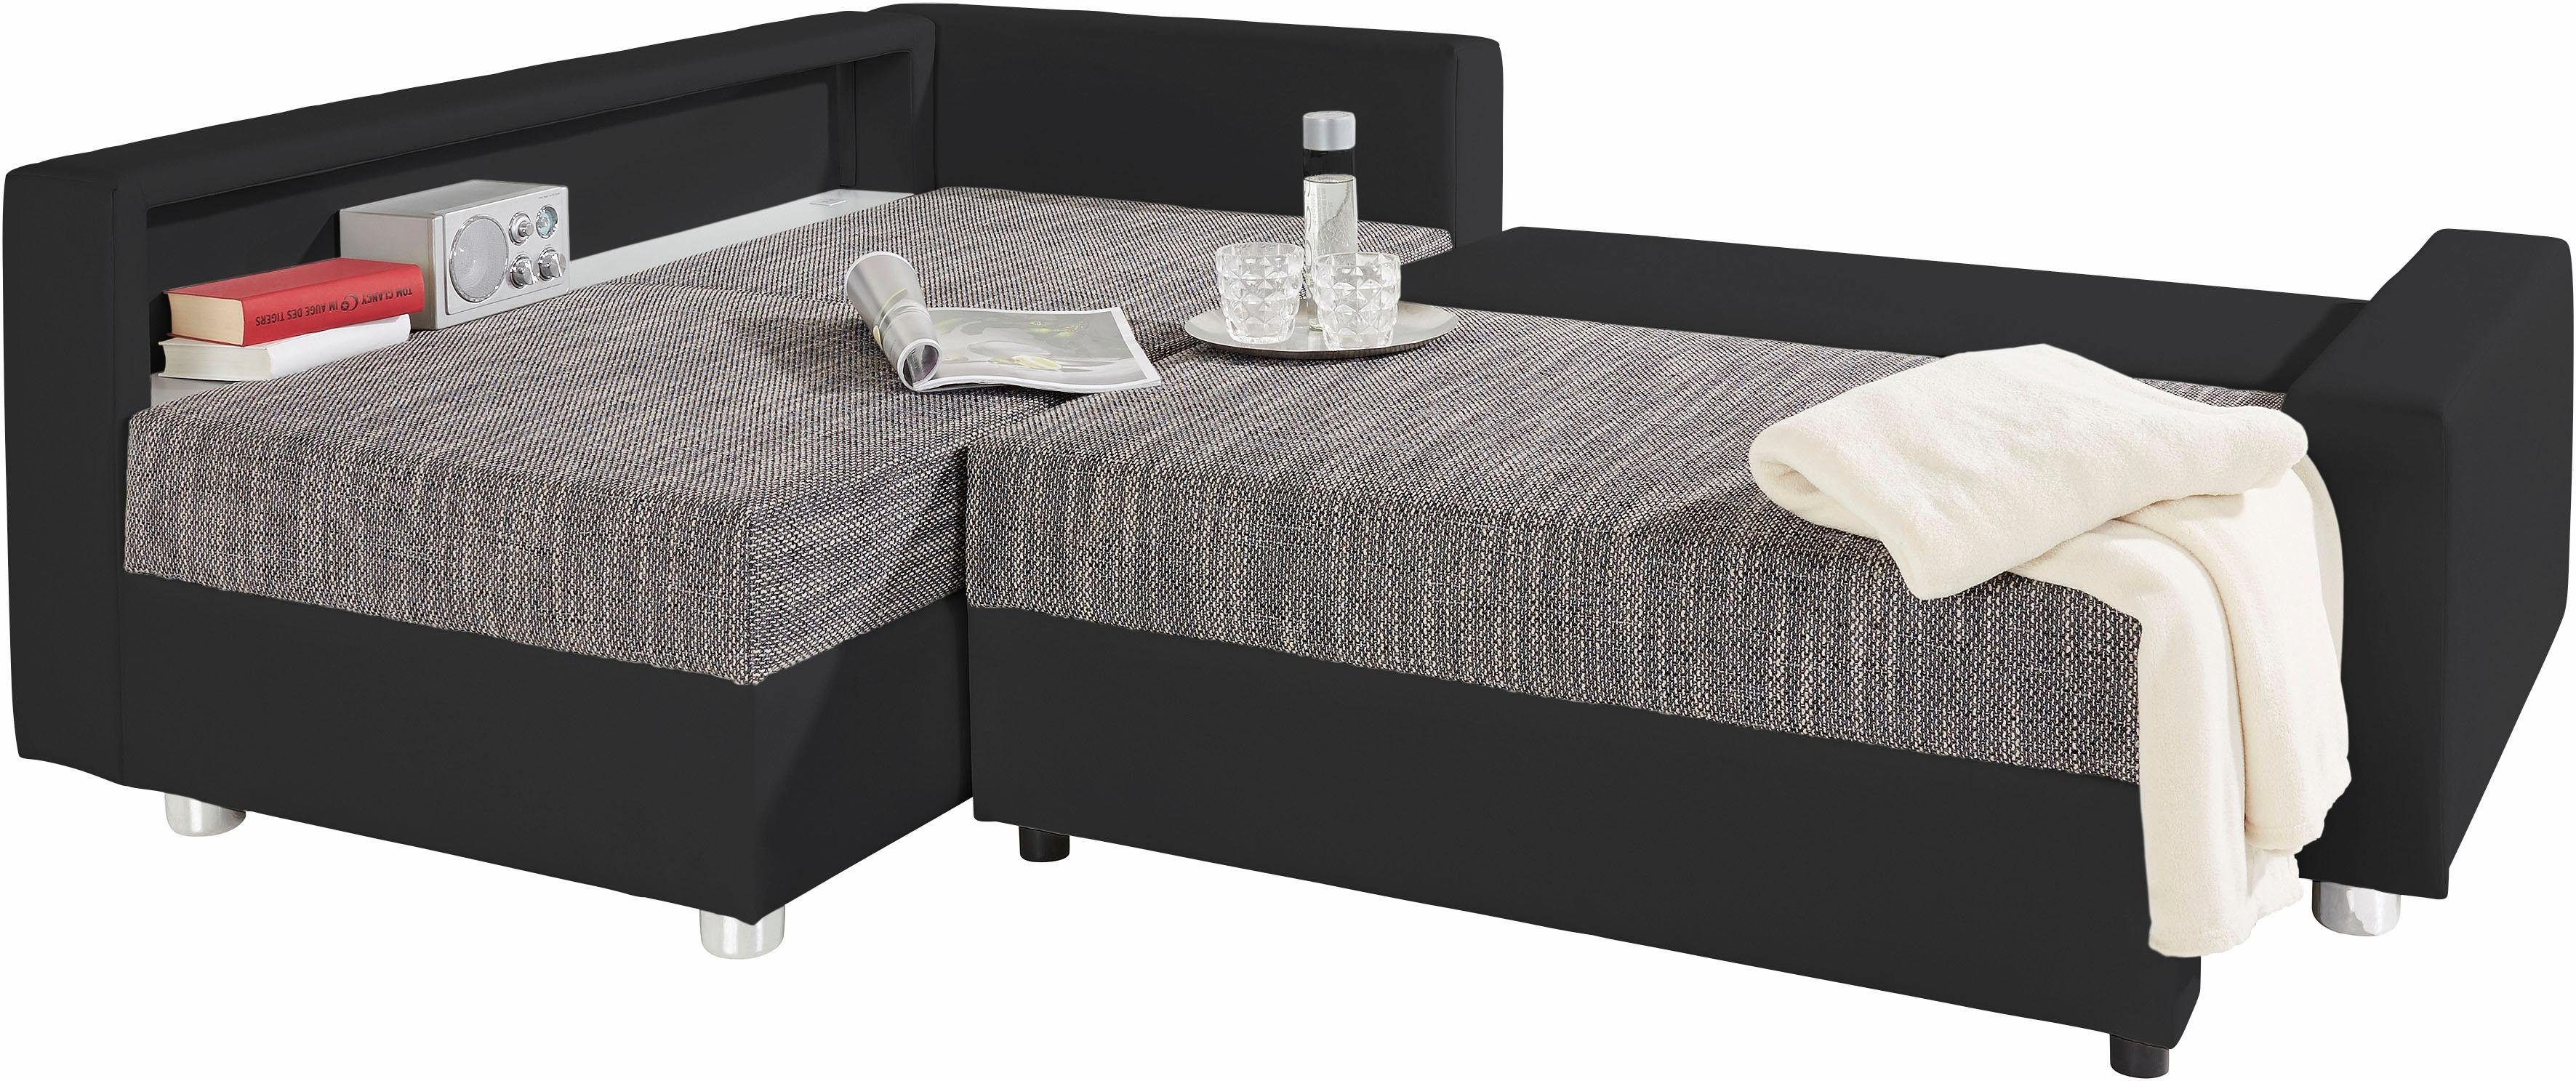 wahlweise Bettfunktion, COLLECTION AB Ecksofa mit RGB-LED-Beleuchtung inklusive Relax, Federkern,